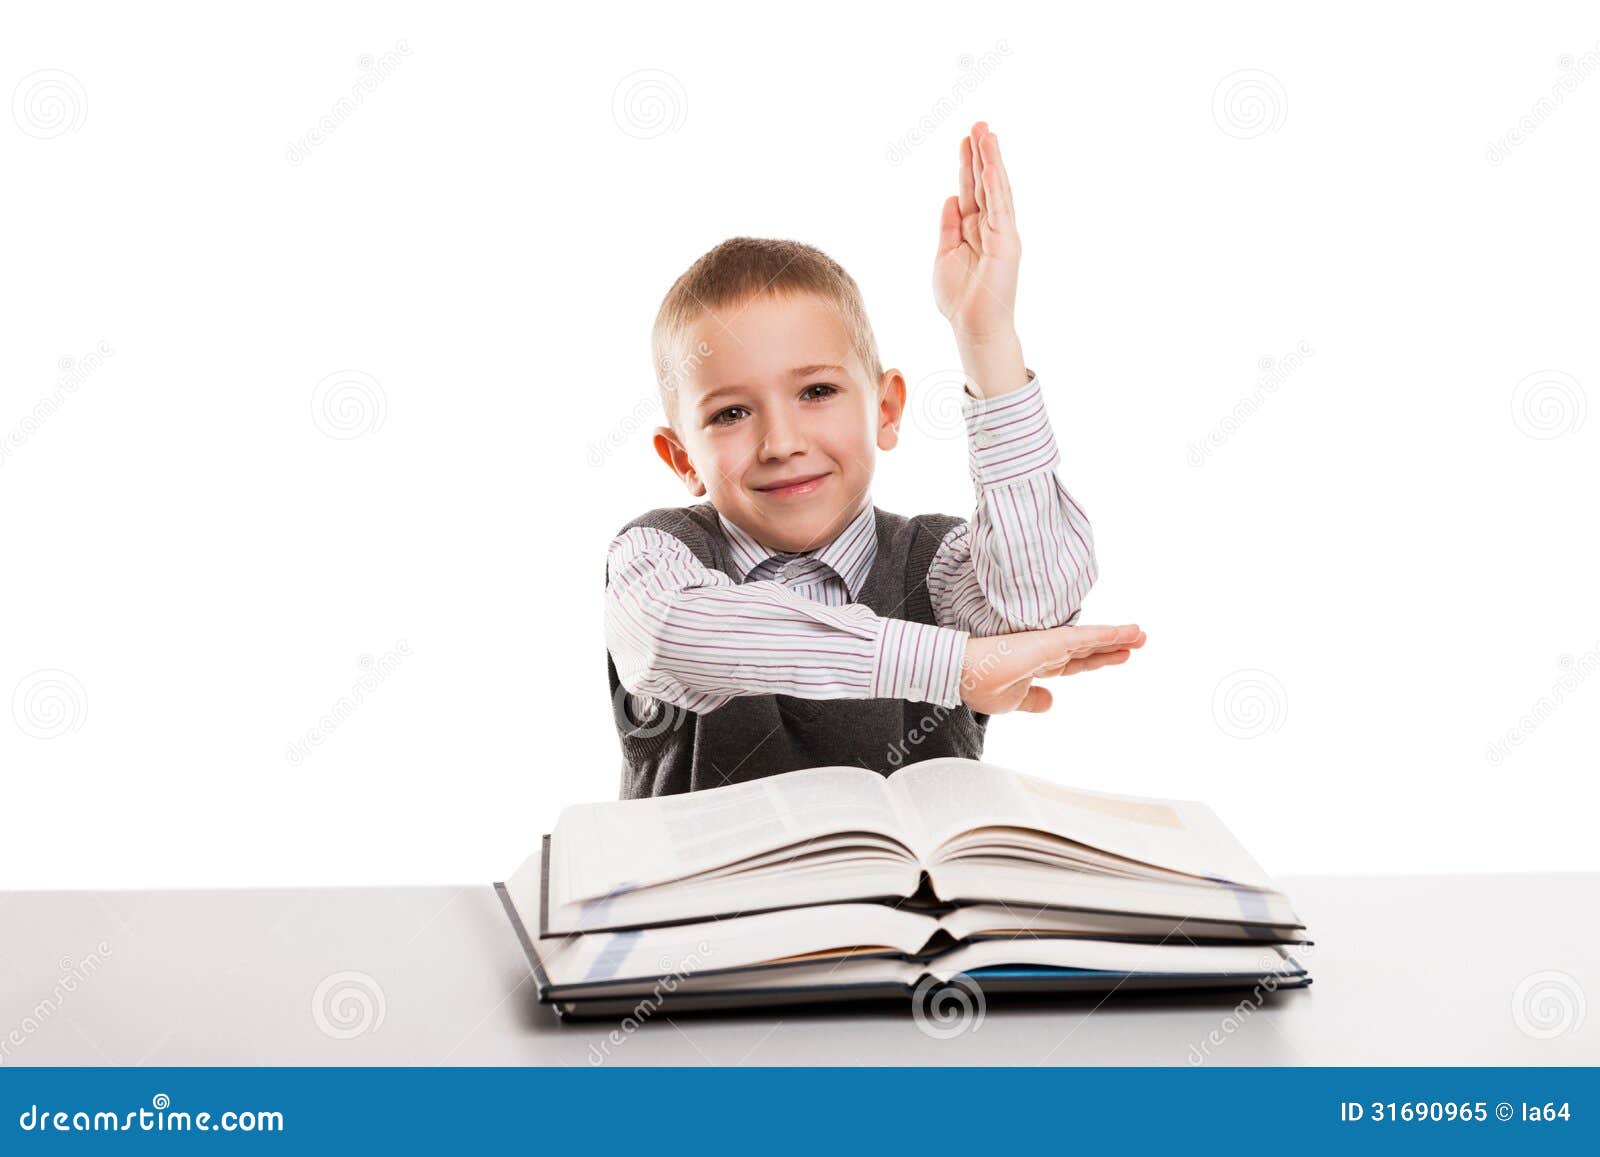 Child With Books At Desk Gesturing Hand Up For Answering School Stock Image - Image ...1300 x 957